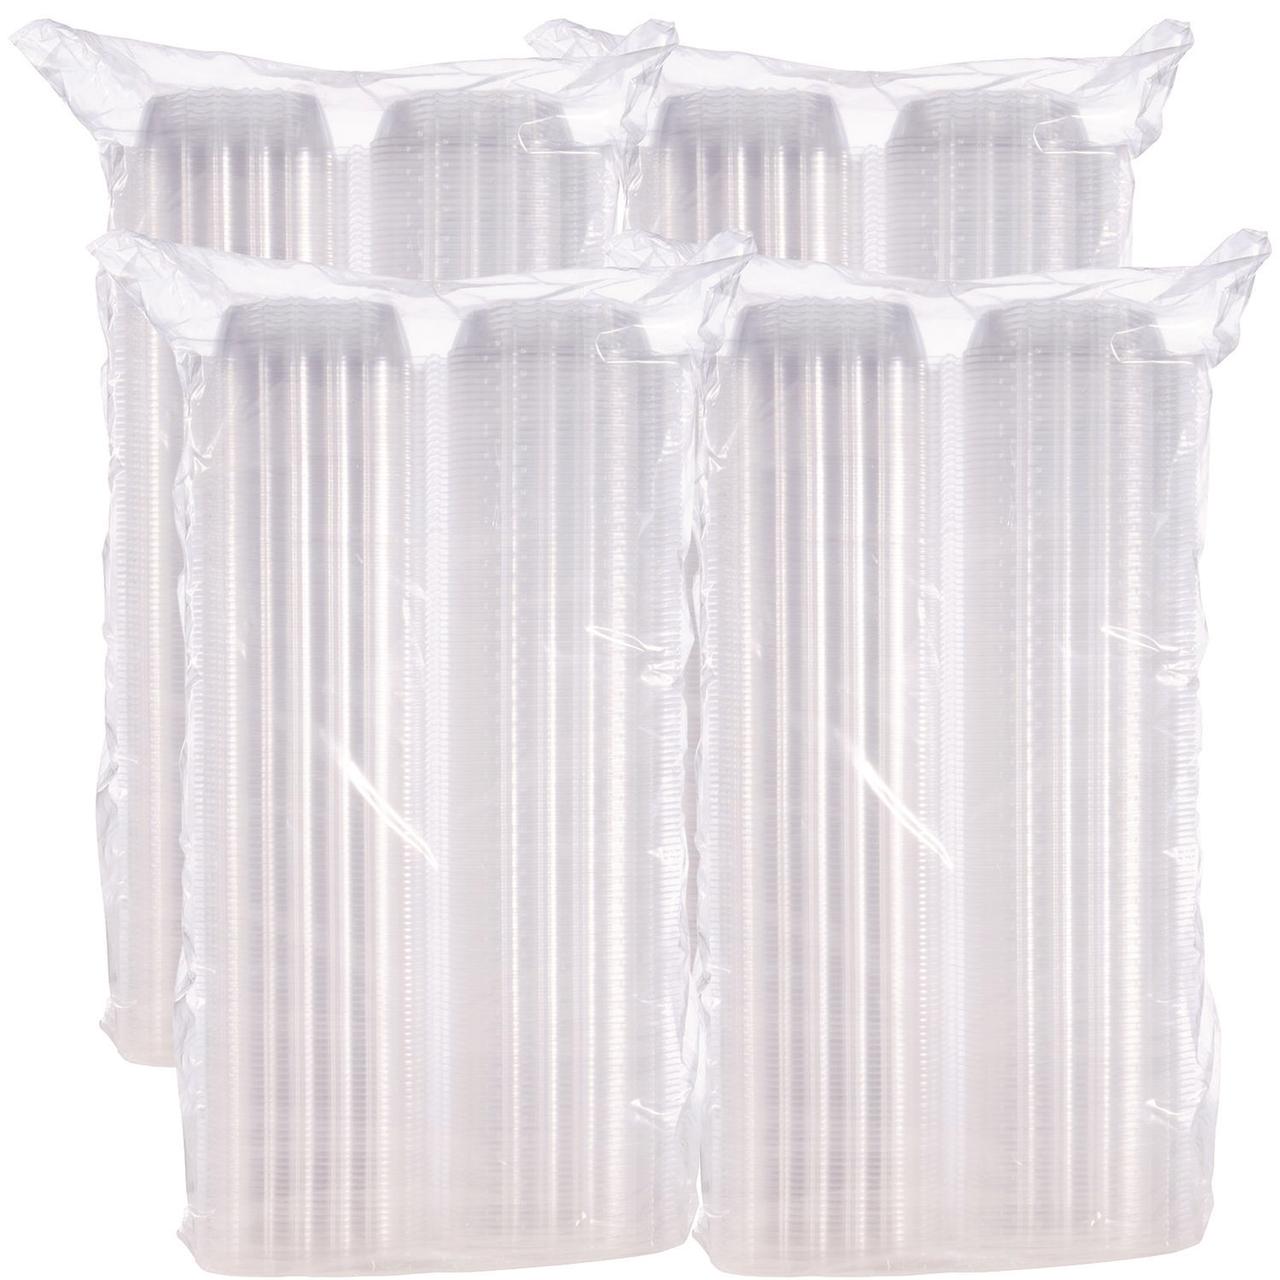 Dart ClearSeal Hinged-Lid Plastic Containers, 5.8 x 6 x 3, Clear, Plastic, 125/Pack, 4 Packs/Carton - image 3 of 4